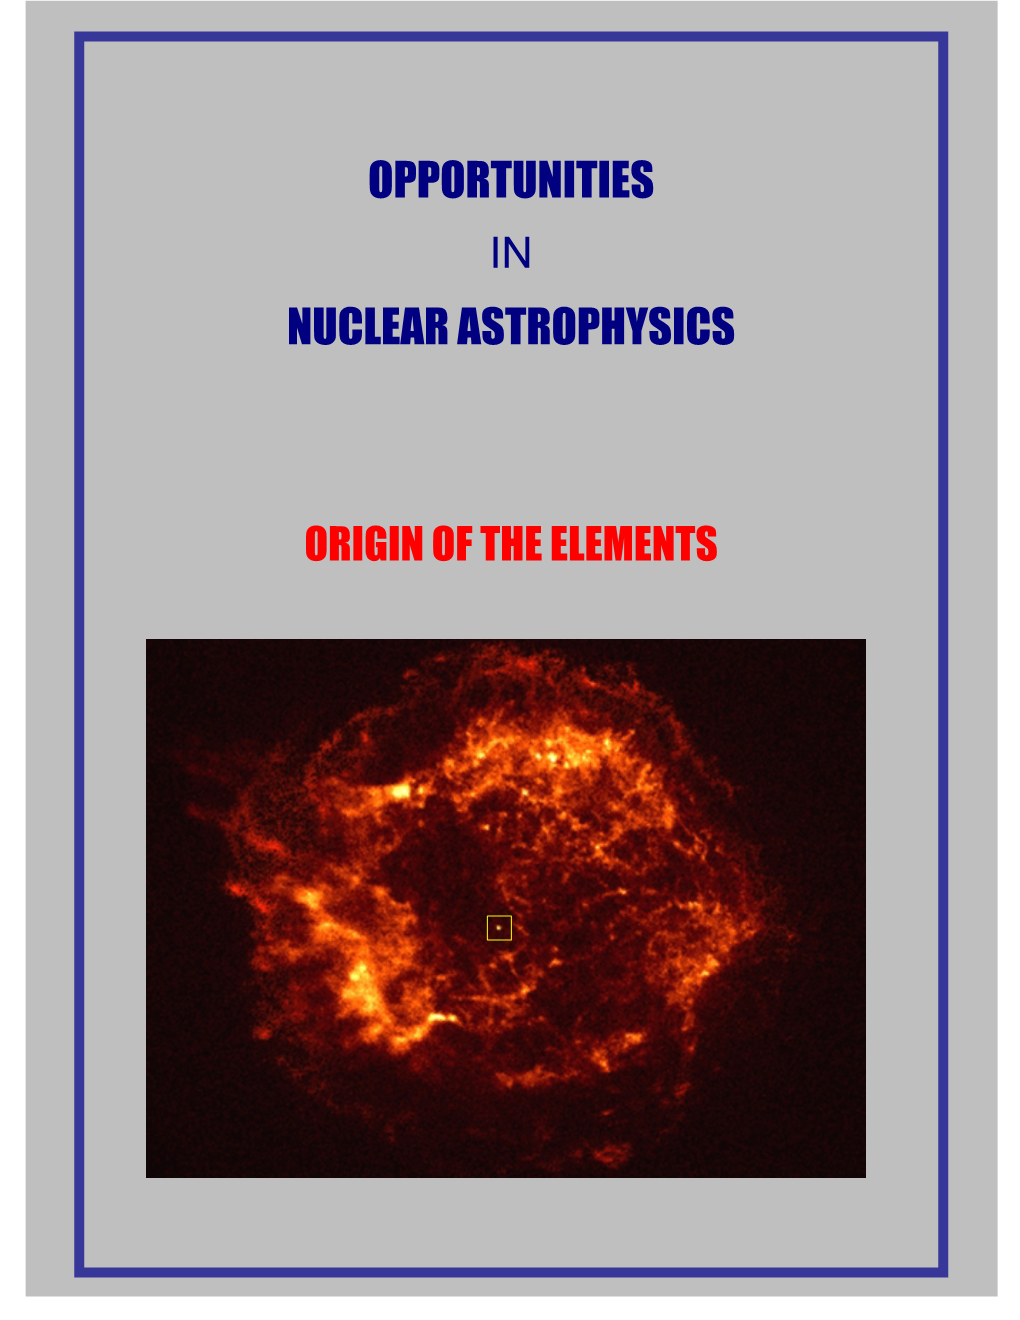 Opportunities Nuclear Astrophysics